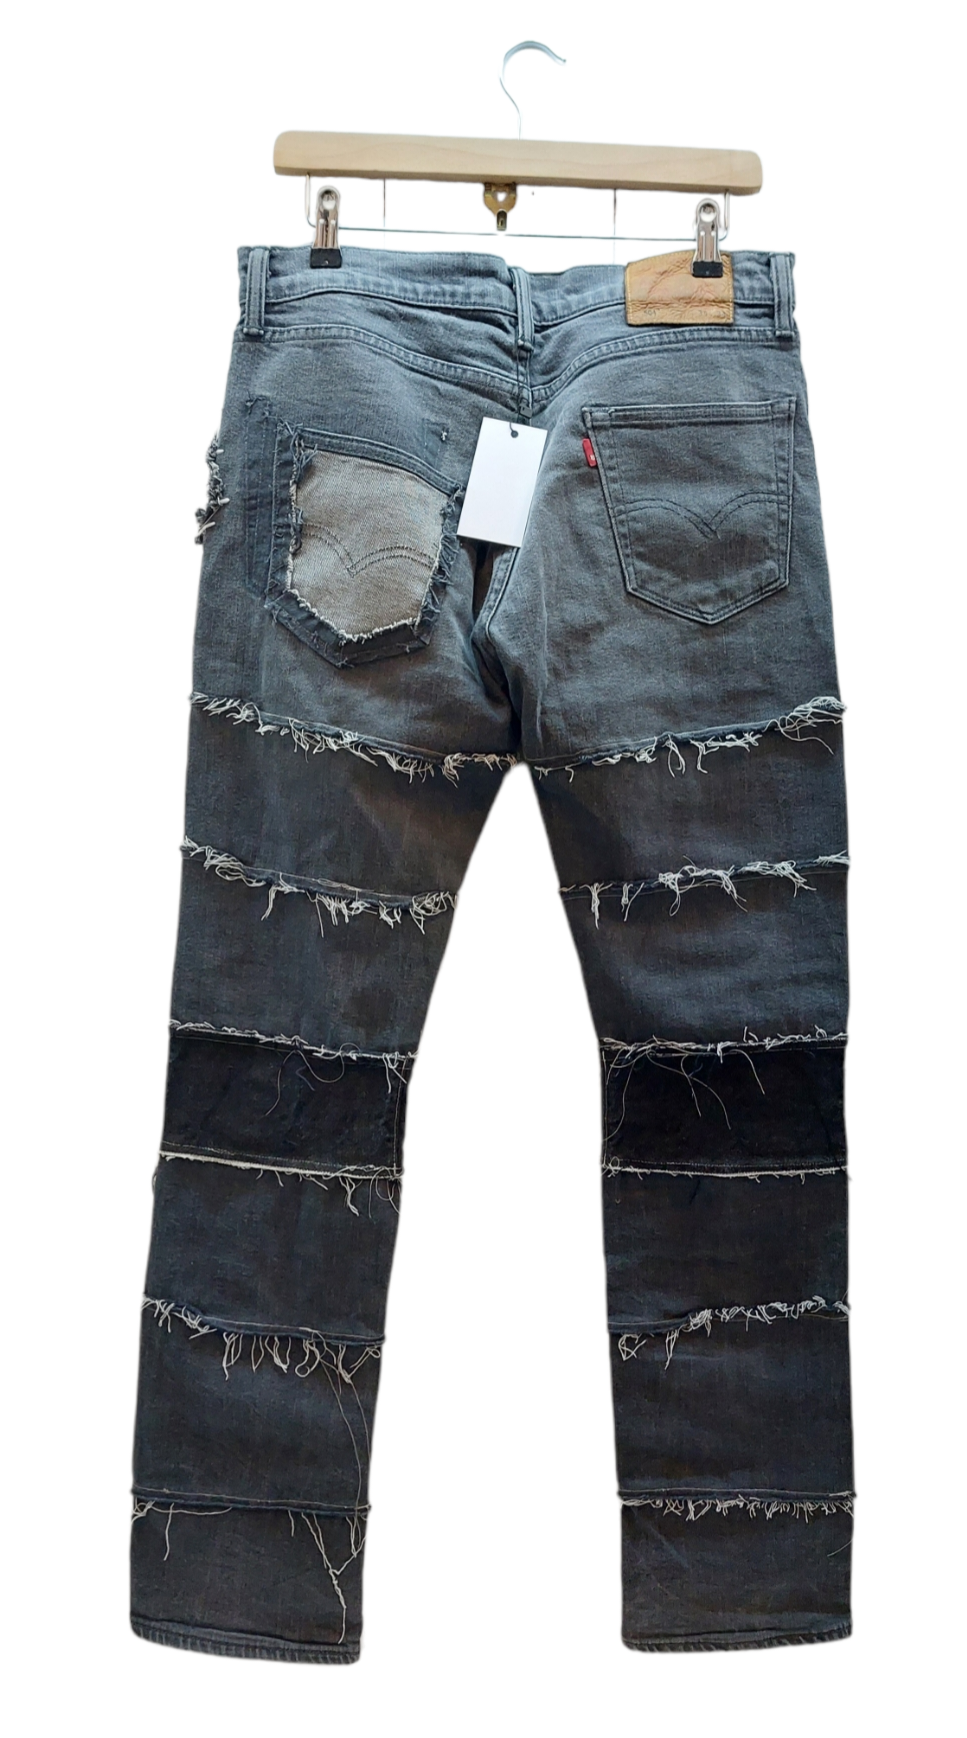 Reconstructed Gray Jeans